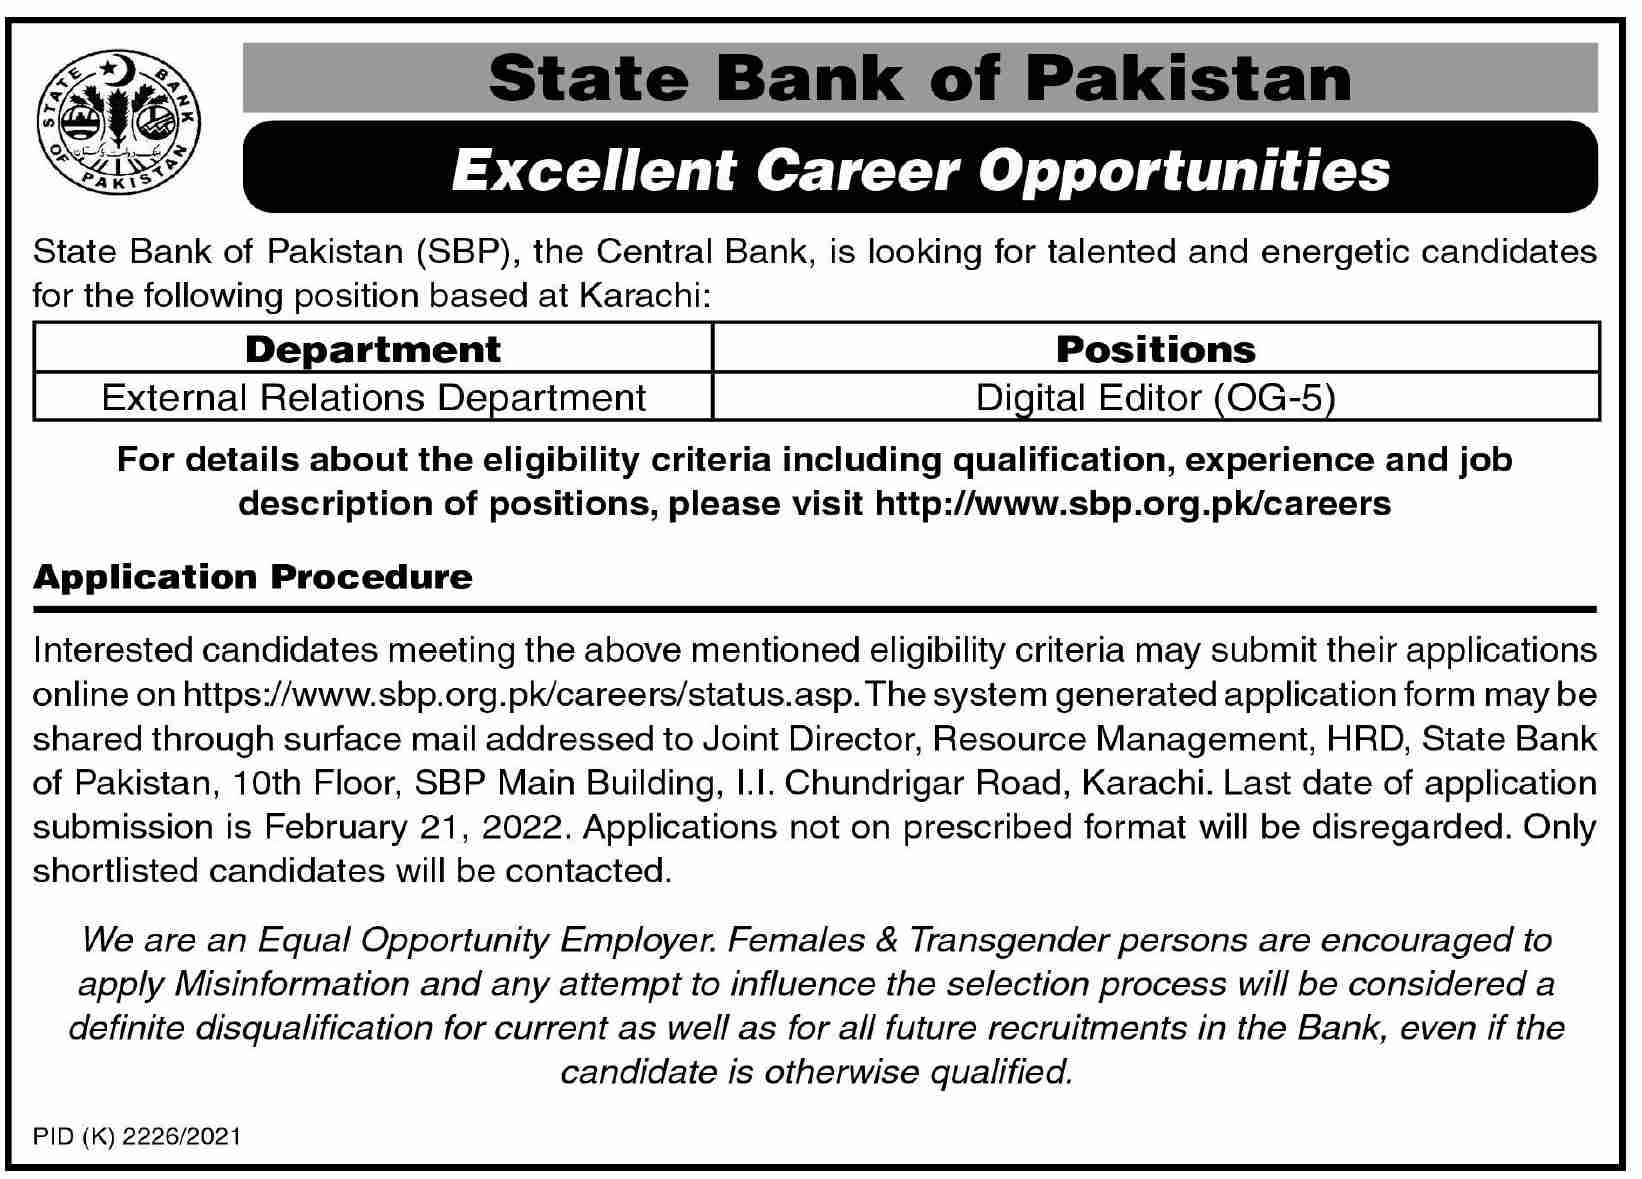 Career Opportunities at State Bank of Pakistan